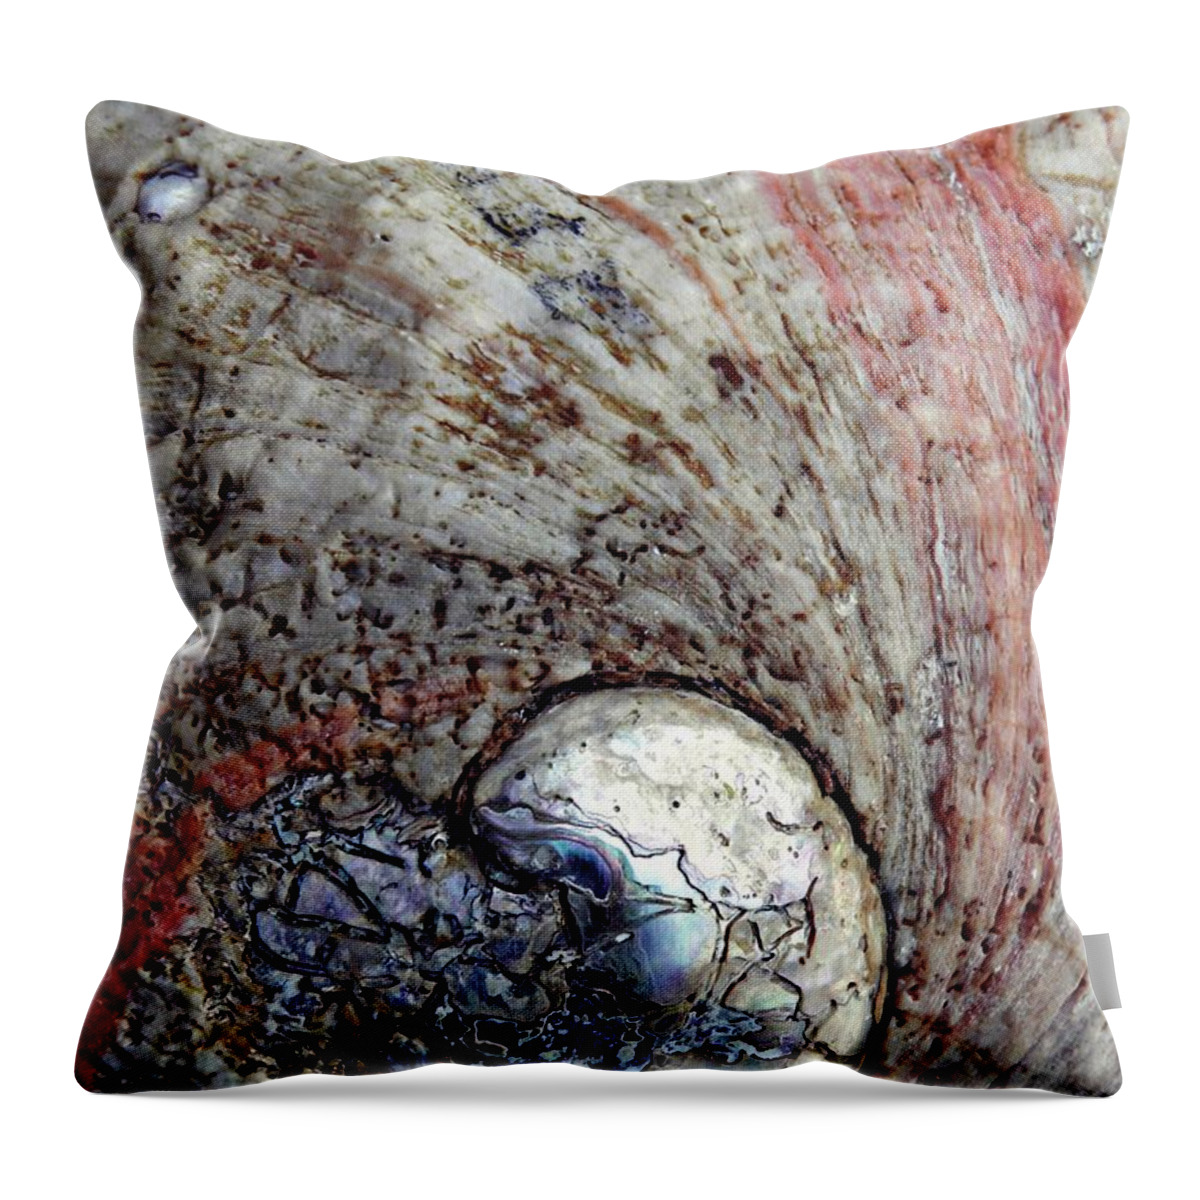 Abalone Throw Pillow featuring the photograph Abalone Shell Abstract 8 by Sarah Loft